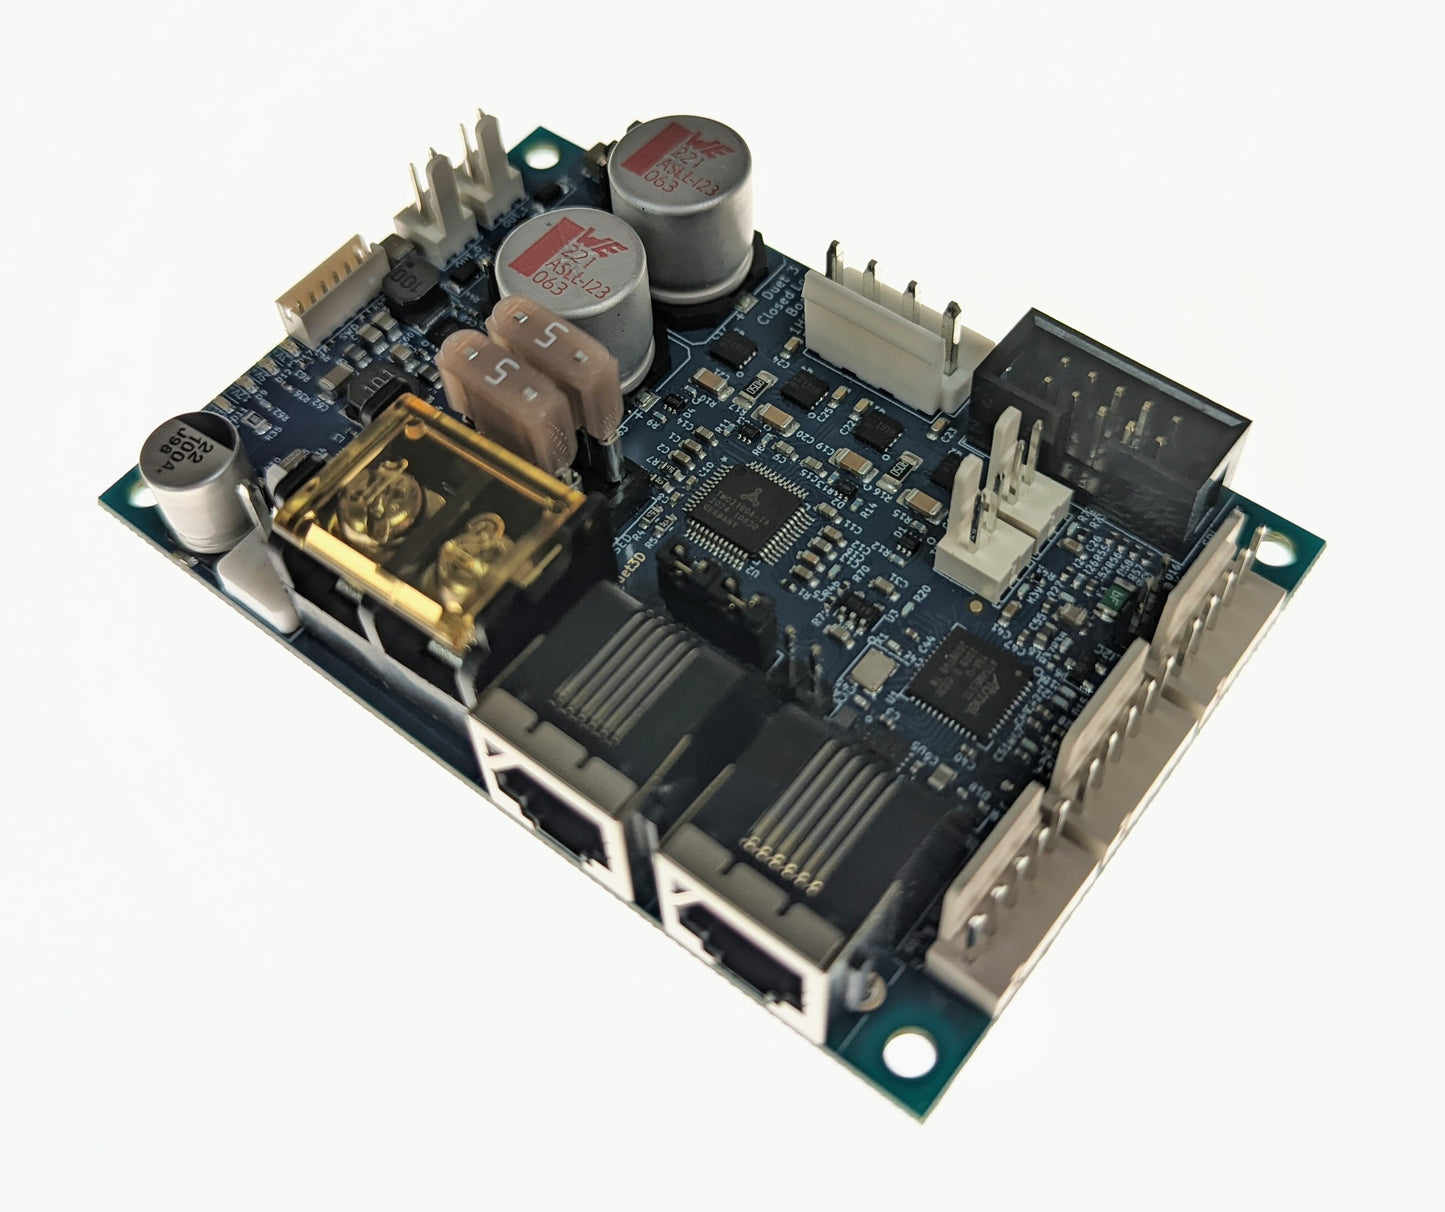 Duet 3 1HCL Expansion Board